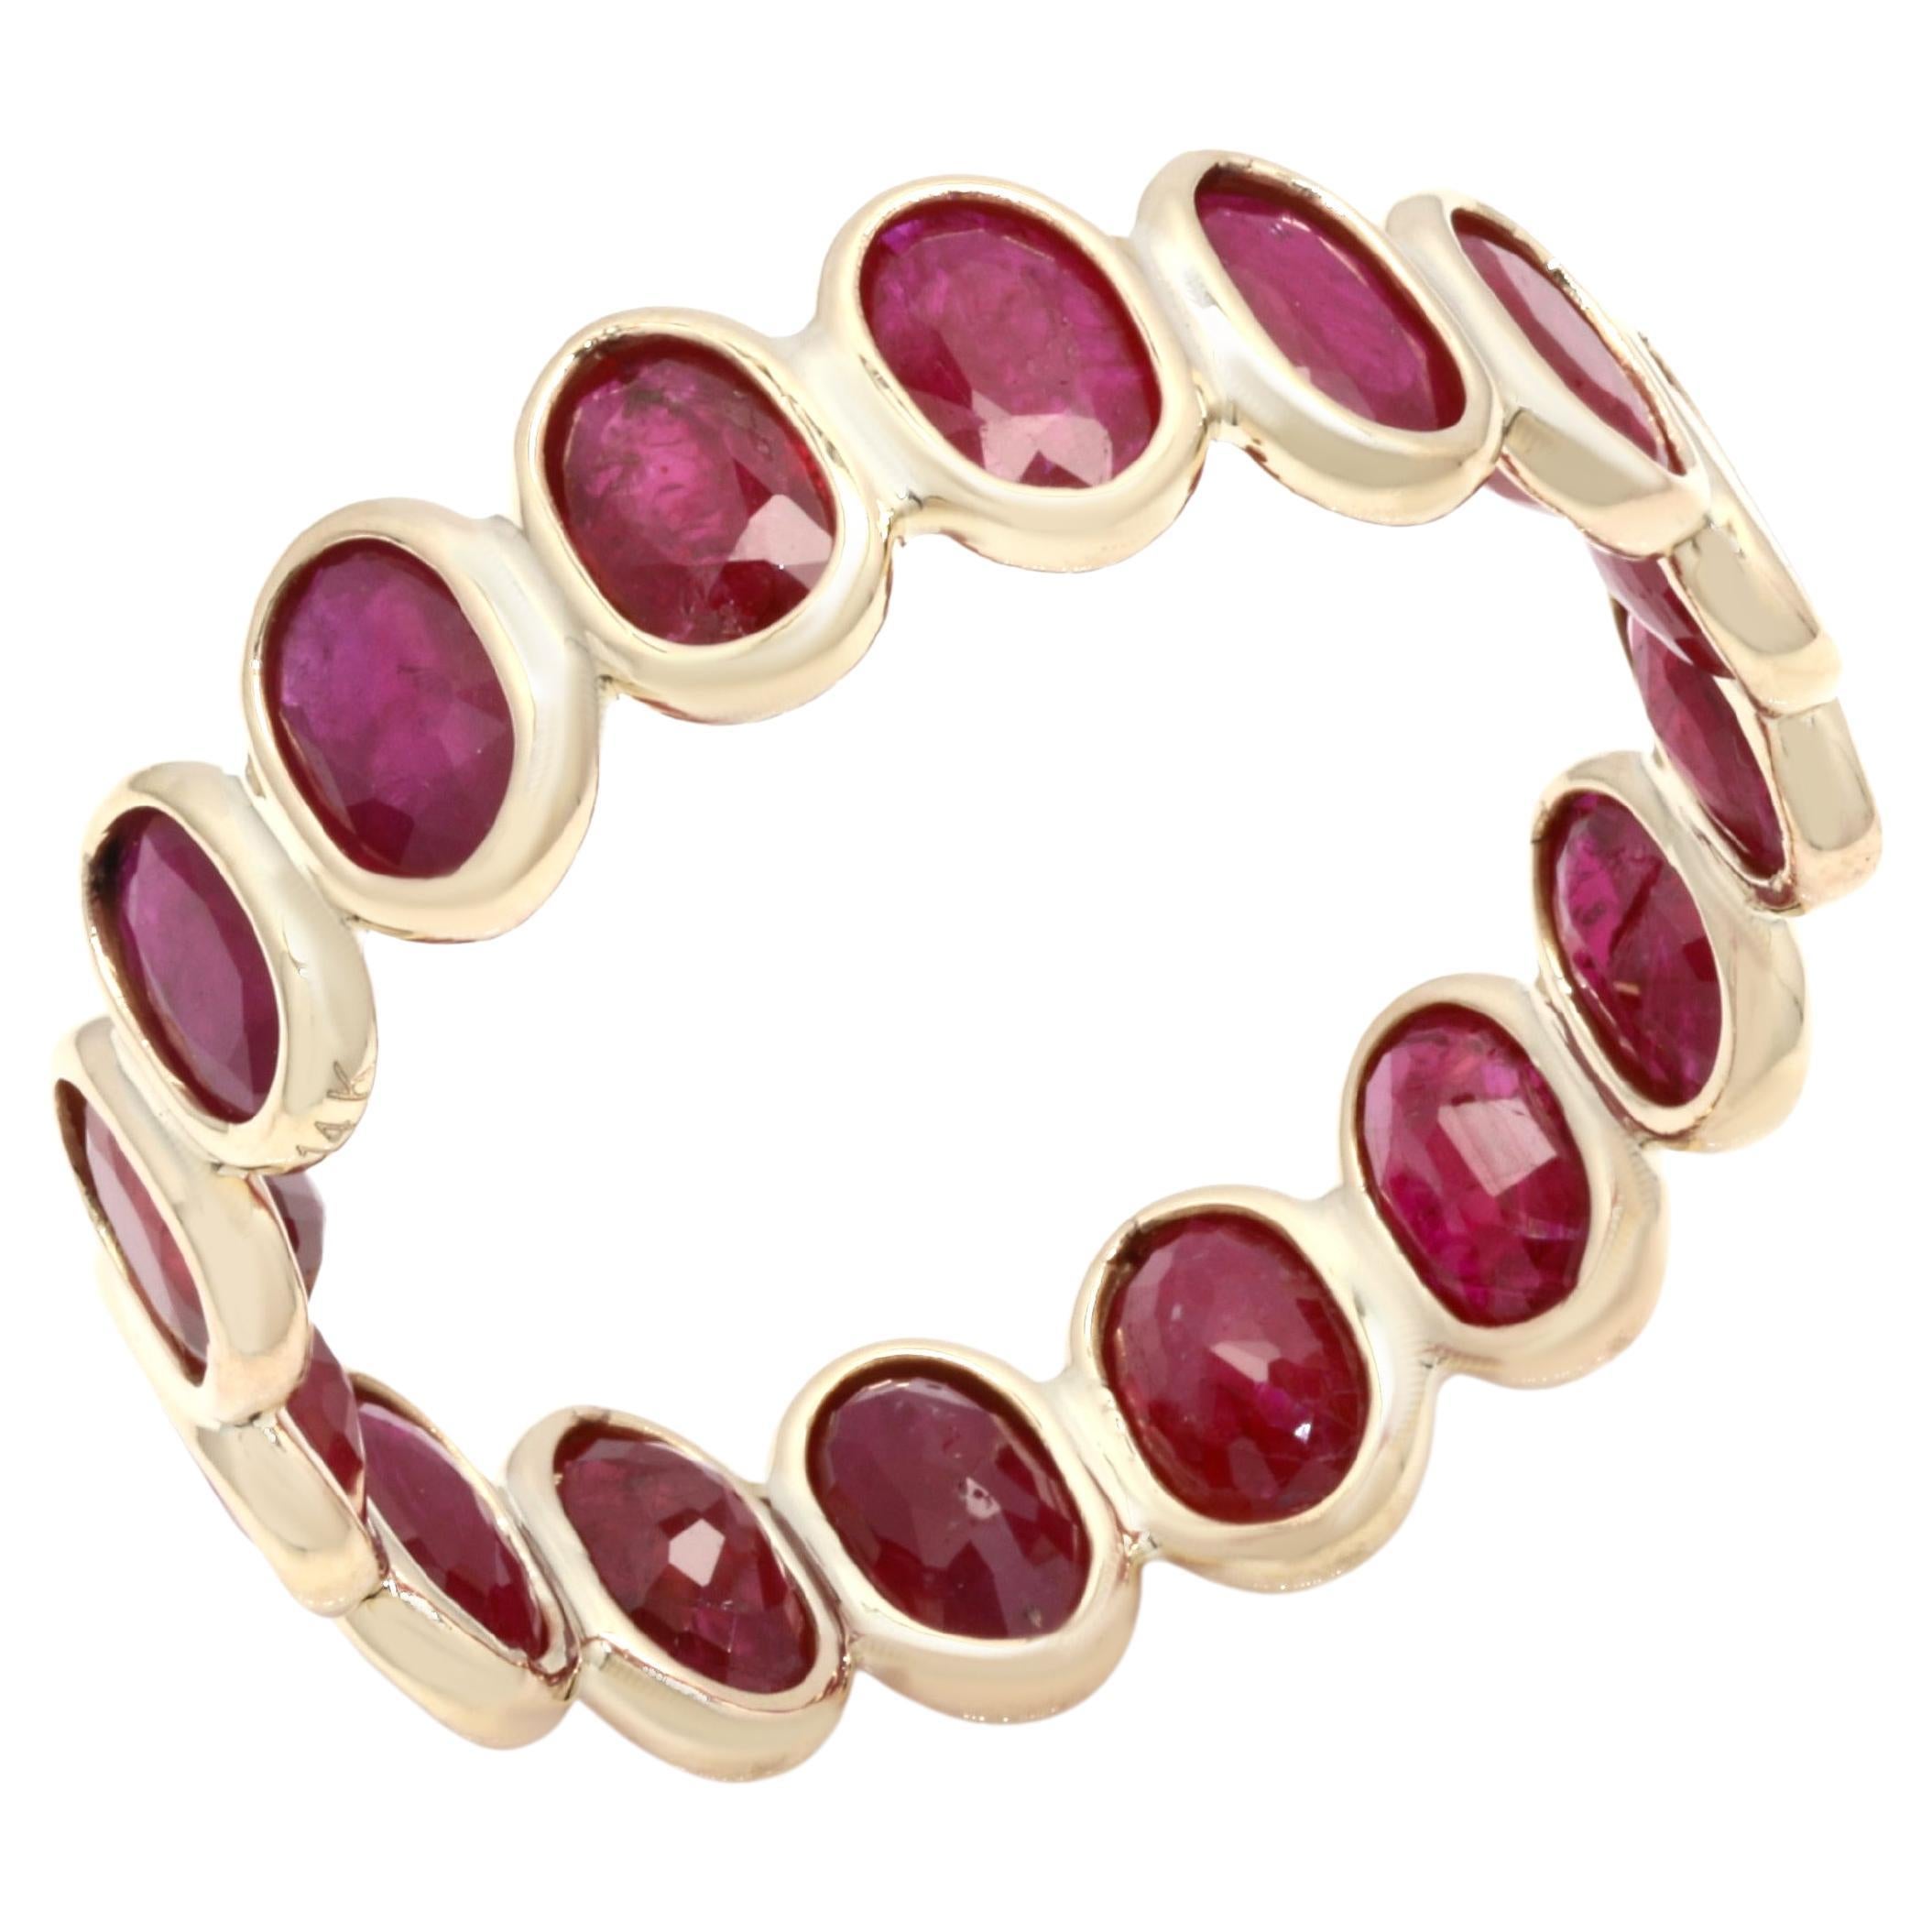 Stackable 4.43 Ct Oval Red Ruby Eternity Band Ring Mounted in 14K Yellow Gold